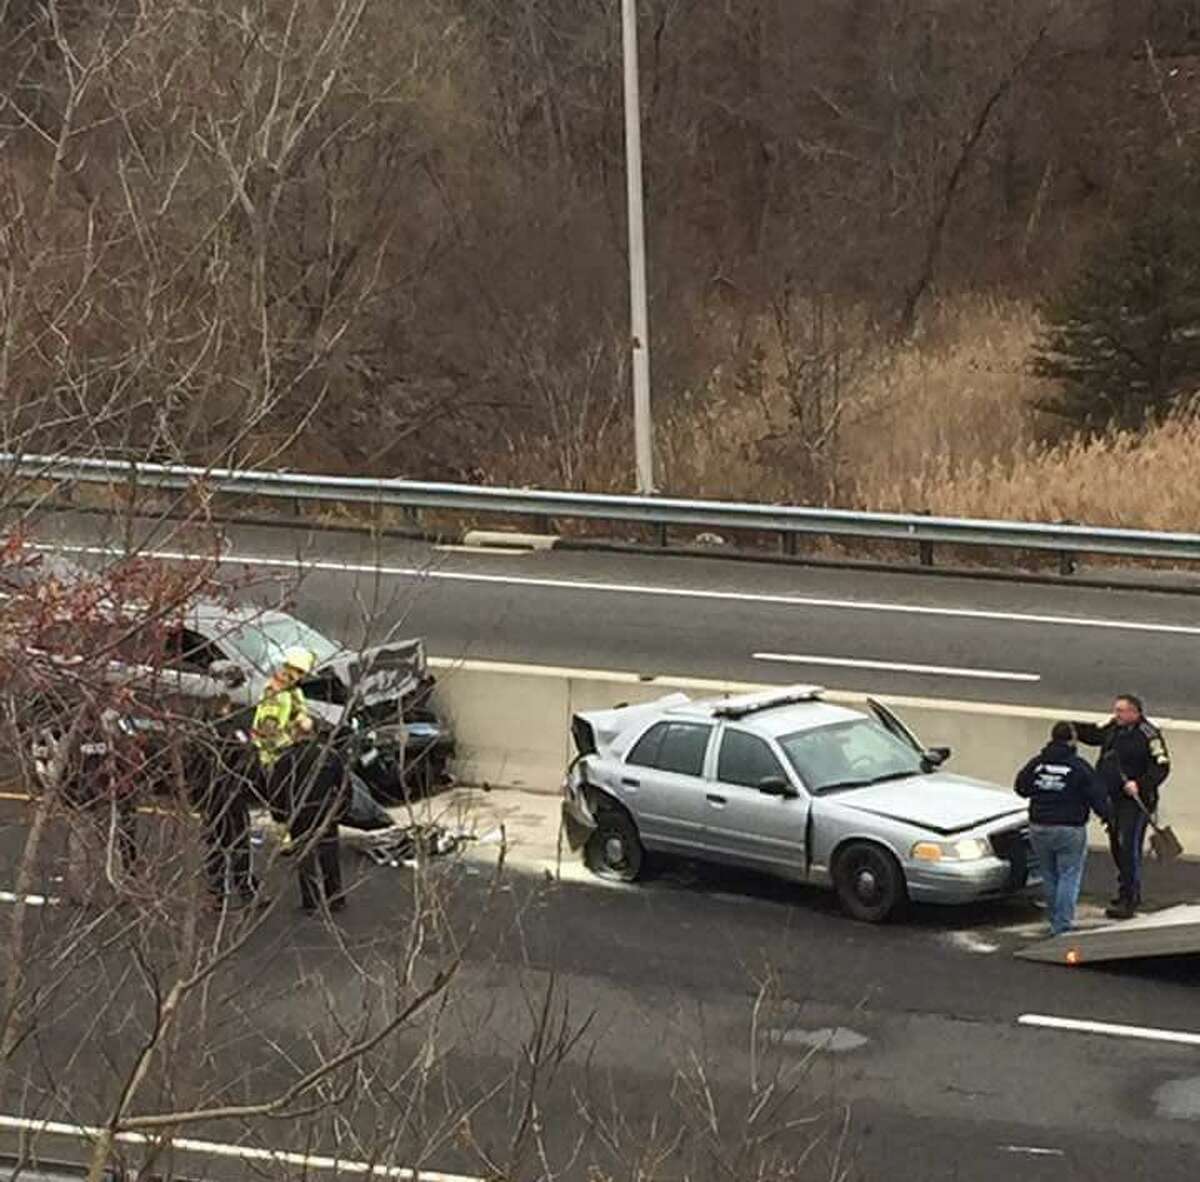 A State Police cruiser was involved in a two-car crash on northbound Route 7 in Brookfield on Monday, Jan. 23, 2017. State police say the cruiser was hit after the tropper stopped to assist a disabled vehicle.